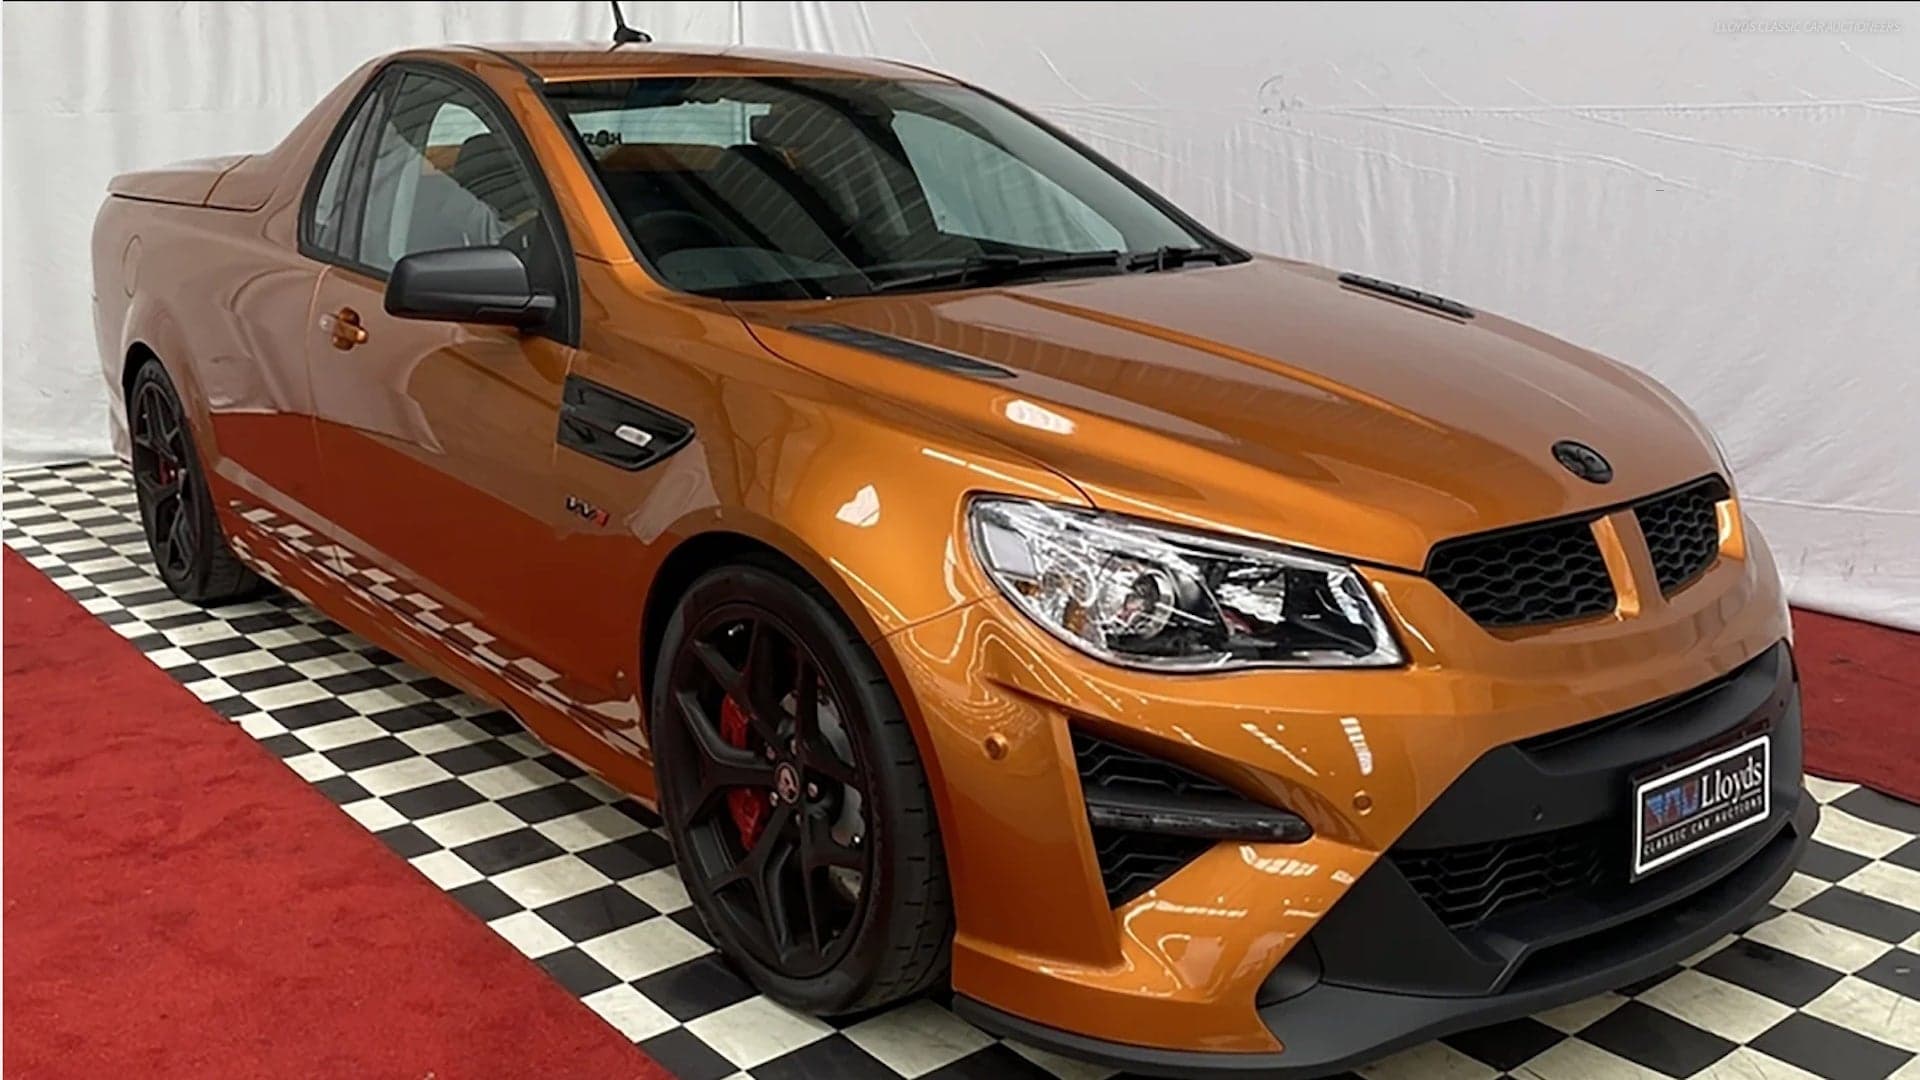 Holden Maloo Ute With Corvette ZR1 Power Goes For $804,000 at Auction